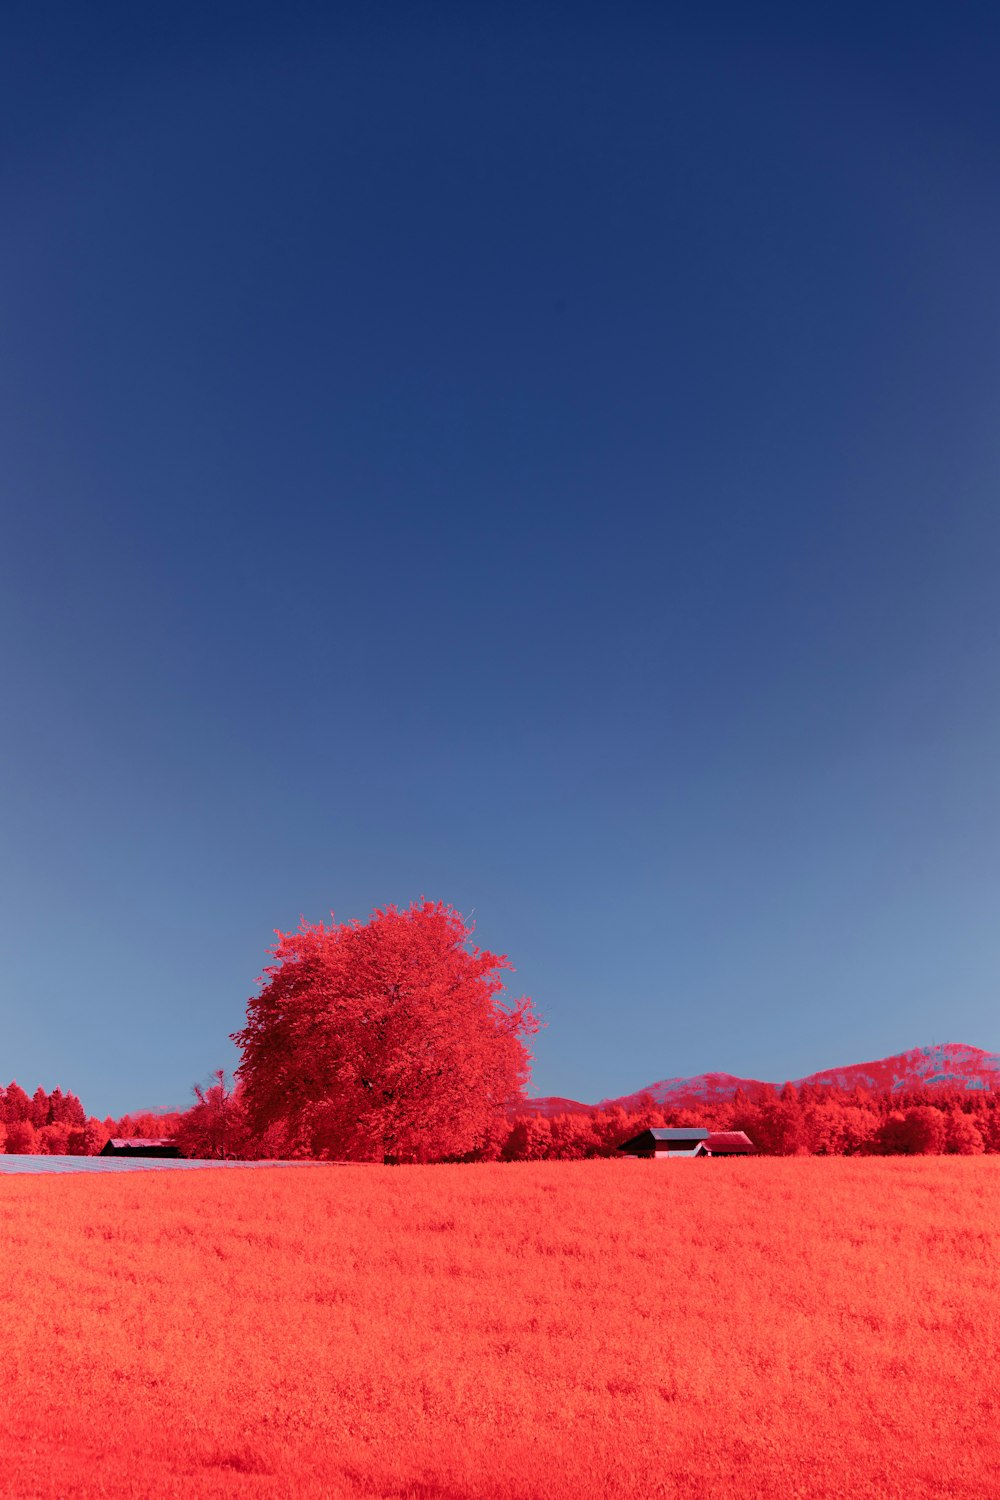 red leaf tree on green grass field during daytime